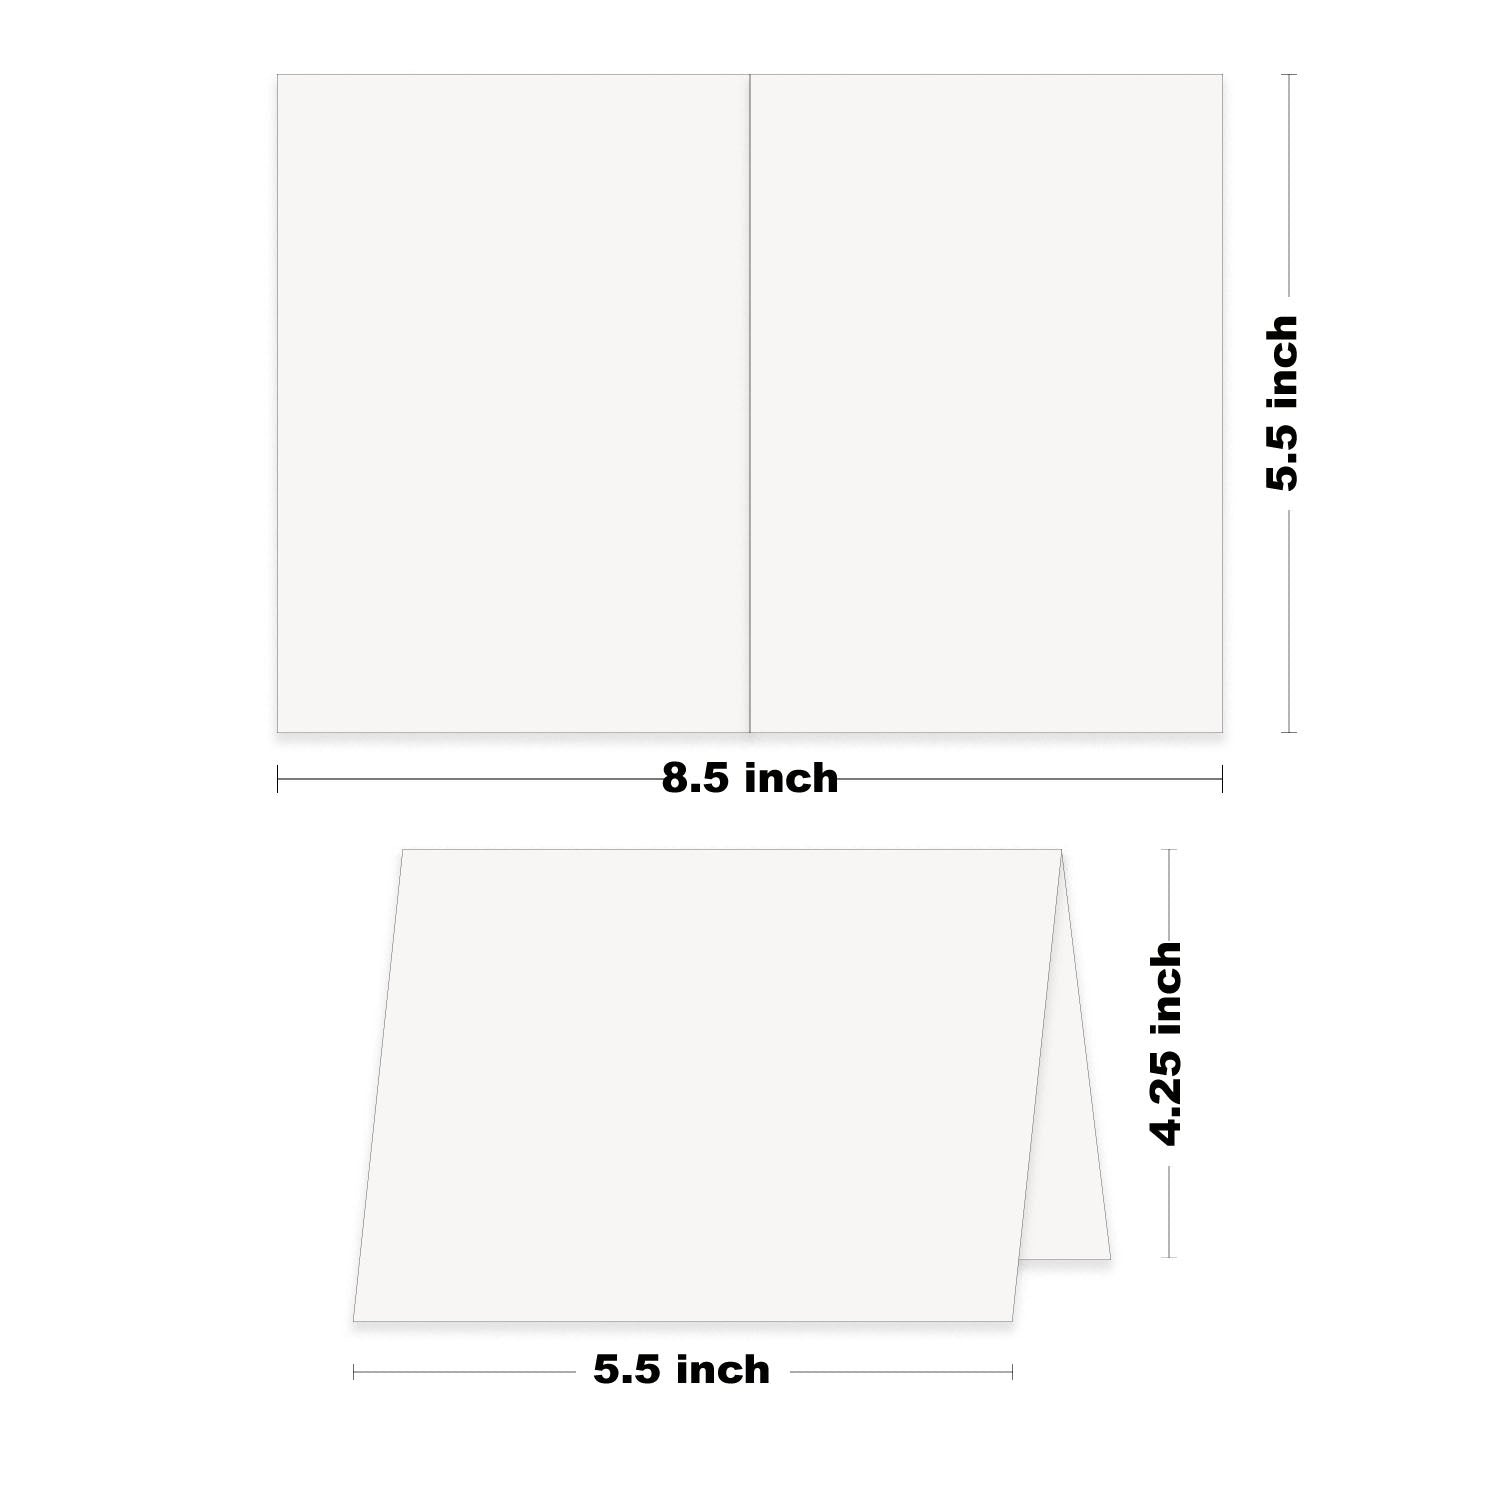 A-Series Paper Size Dimensions (in, cm, mm) - Neenah Paper